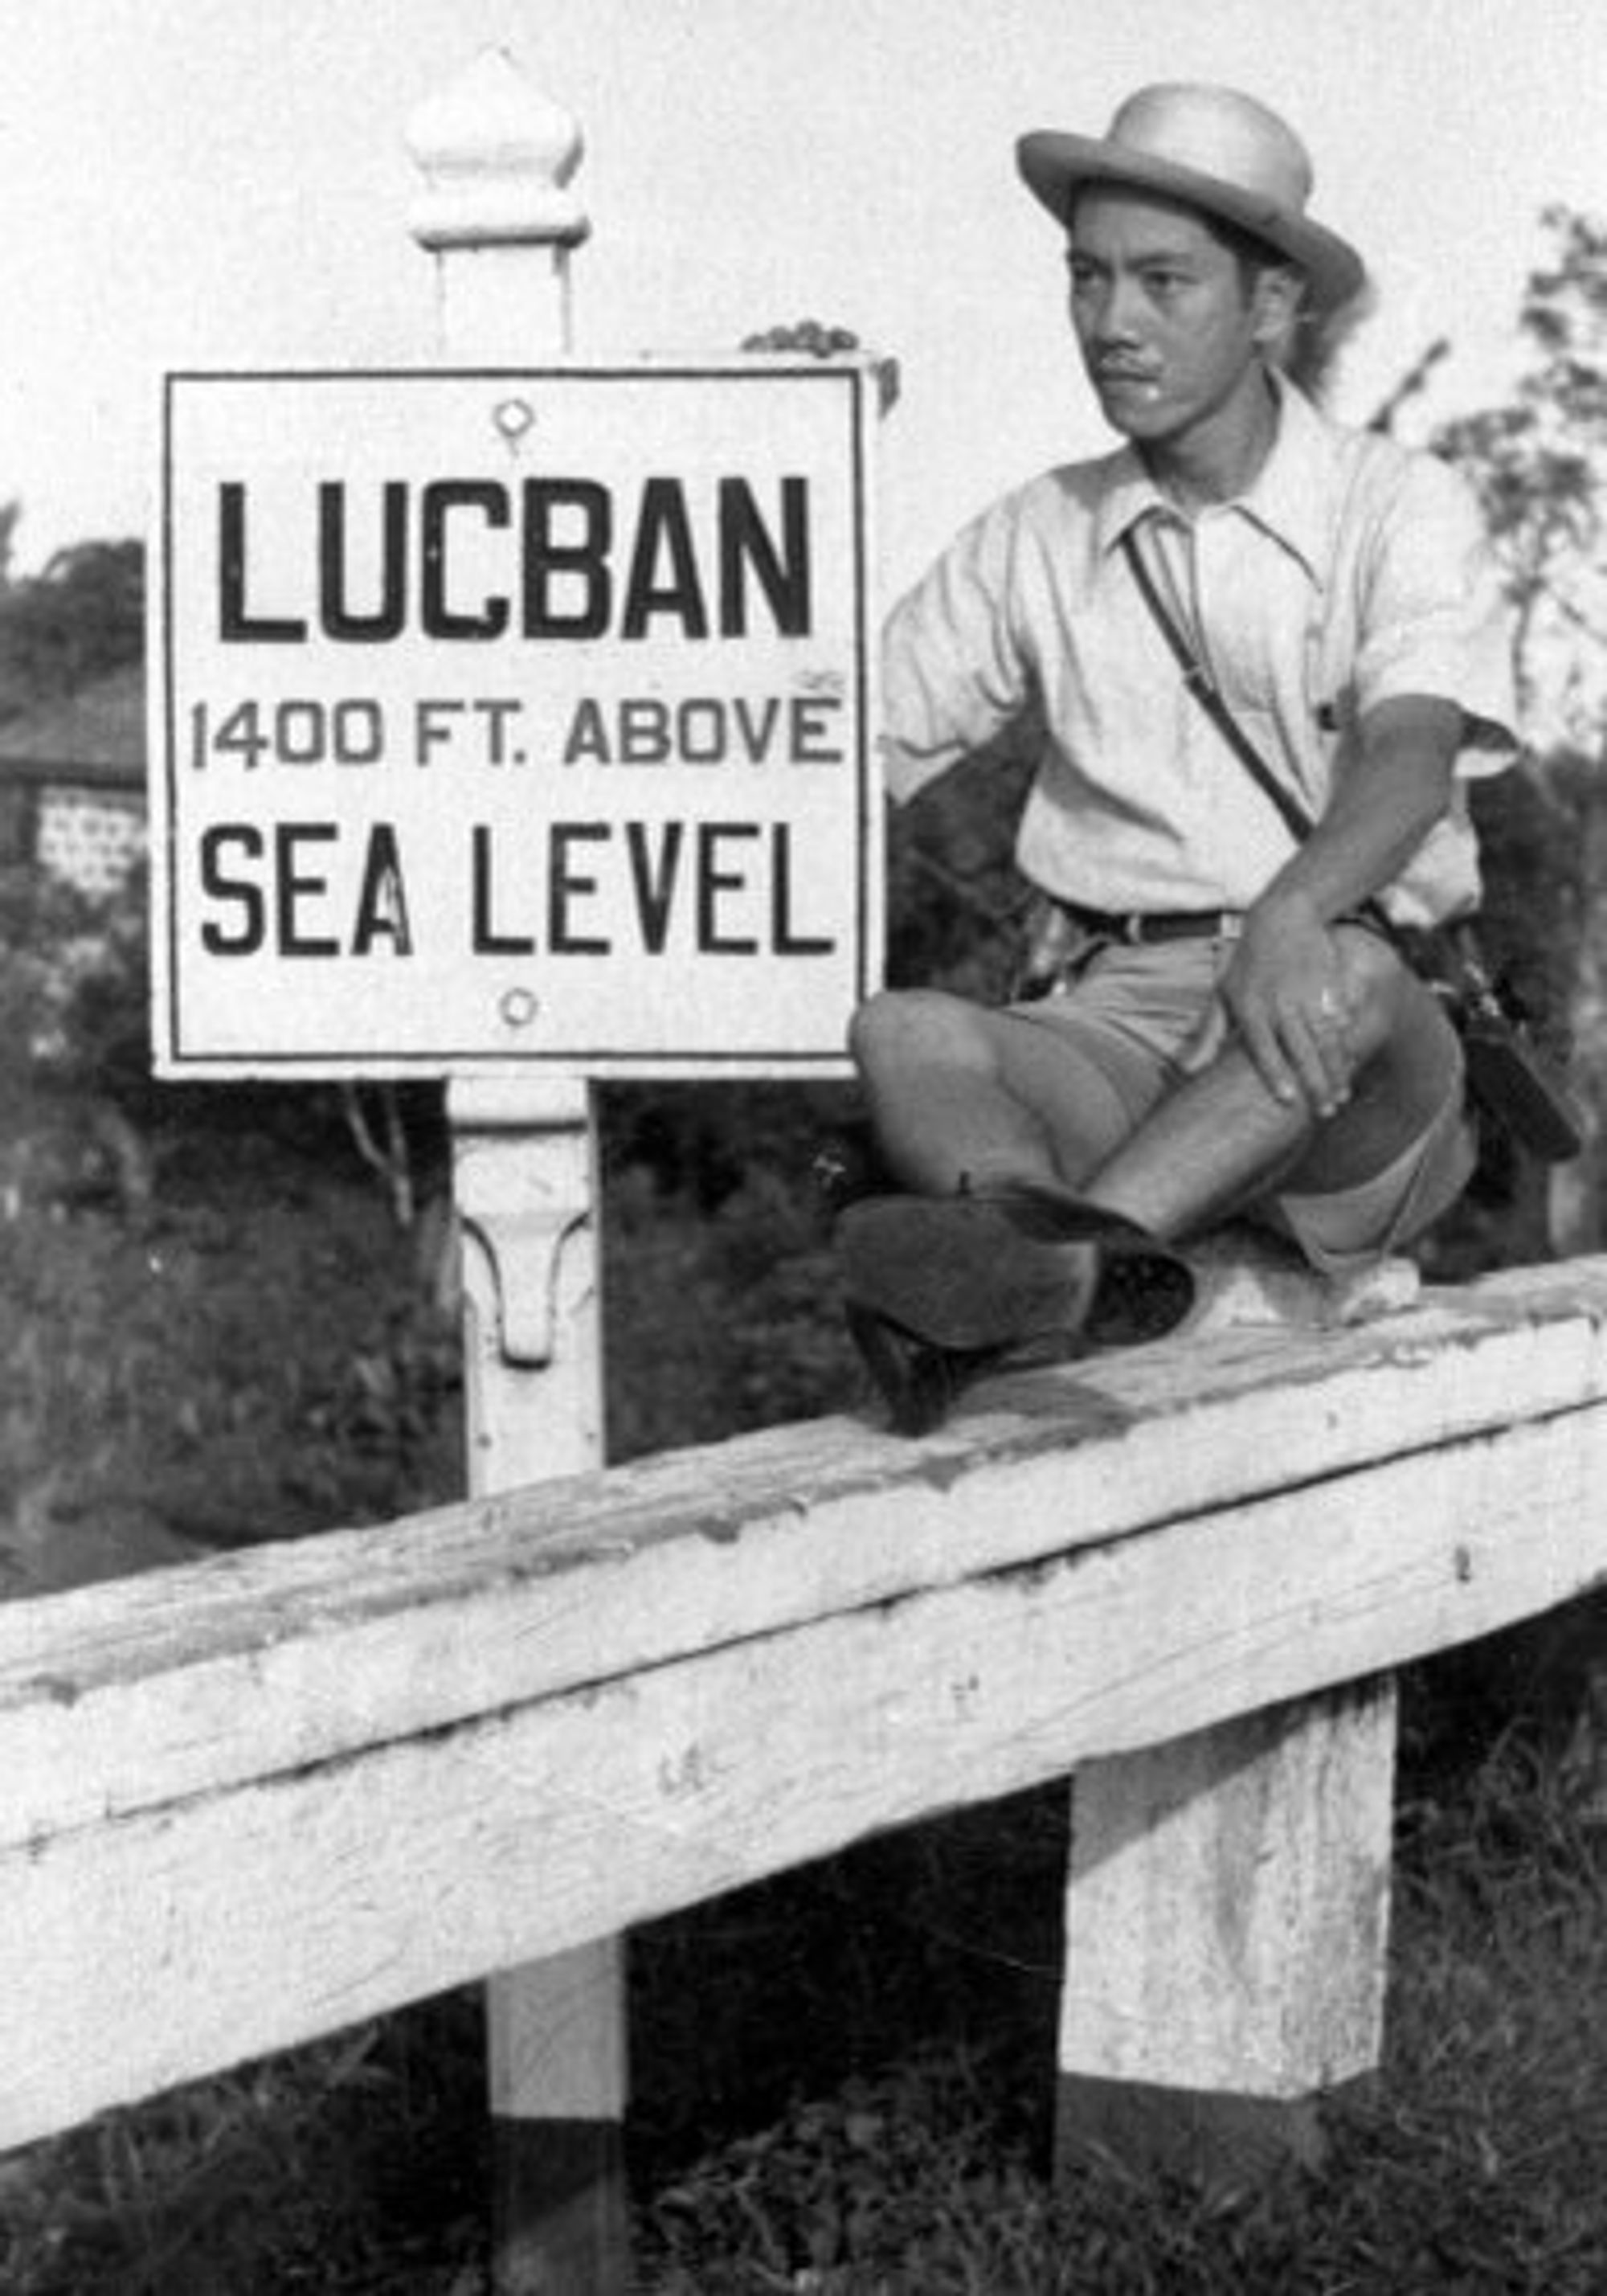 A photograph that depicts young Protomartir wearing a hat and a polo t-shirt. His expression is serious and he's looking off into the distance. His hand is resting on a sign that reads, "LUCBAN. 1400 FT. ABOVE SEA LEVEL"